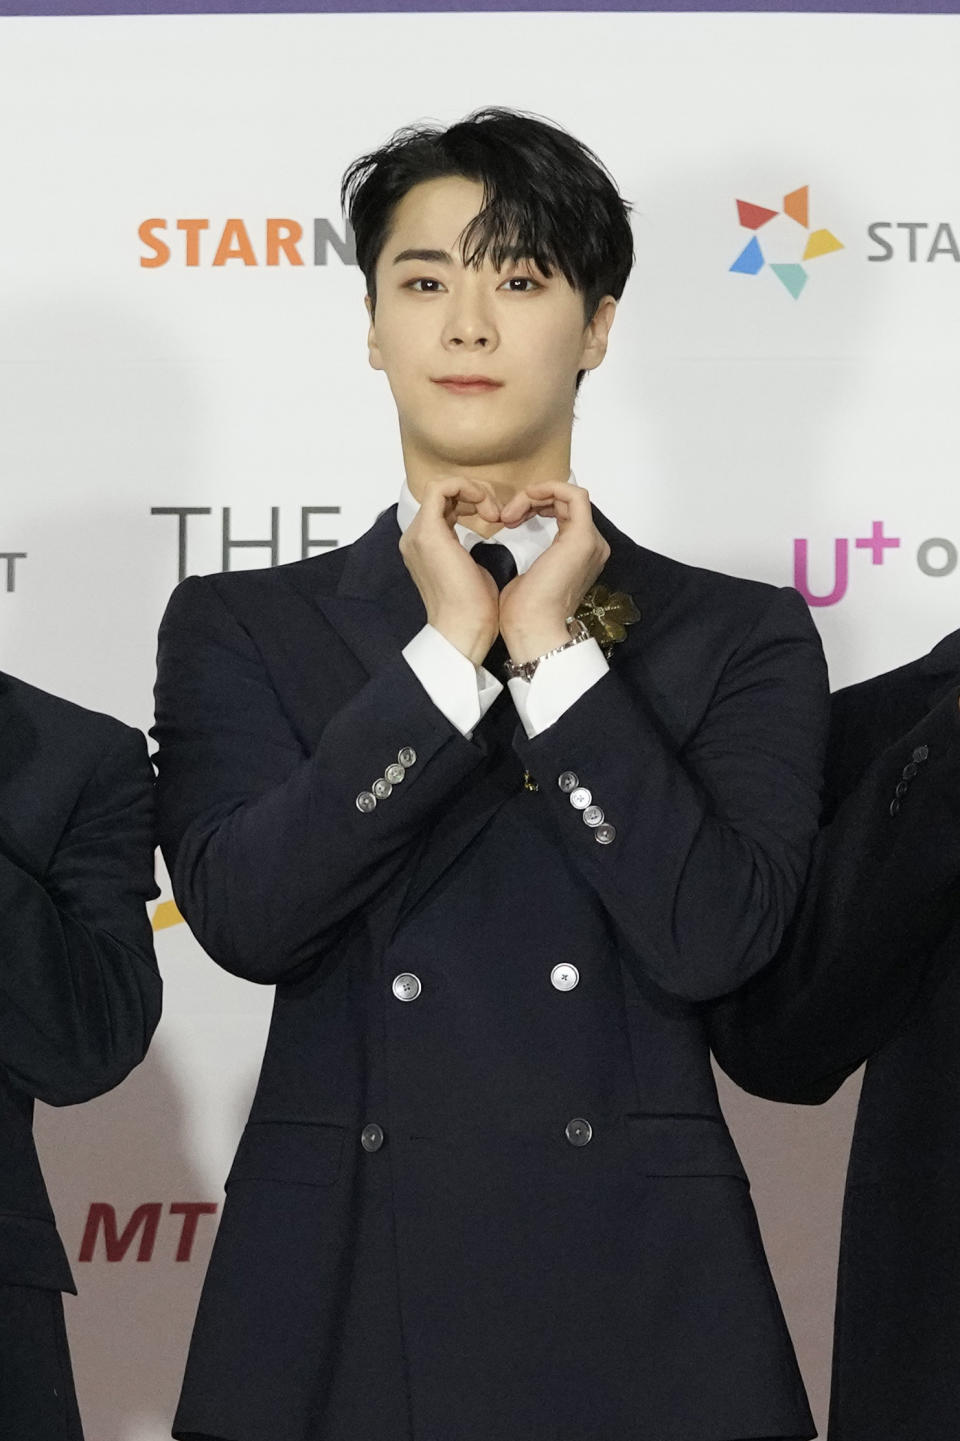 FILE - Moon Bin, a member of K-Pop group ASTRO, poses for photos on the red carpet for the 2021 Asia Artist Awards in Seoul, South Korea, Dec. 2, 2021. Moon Bin was found dead at his home in Seoul, his management agency said Thursday, April 20, 2023. (AP Photo/Lee Jin-man, File)